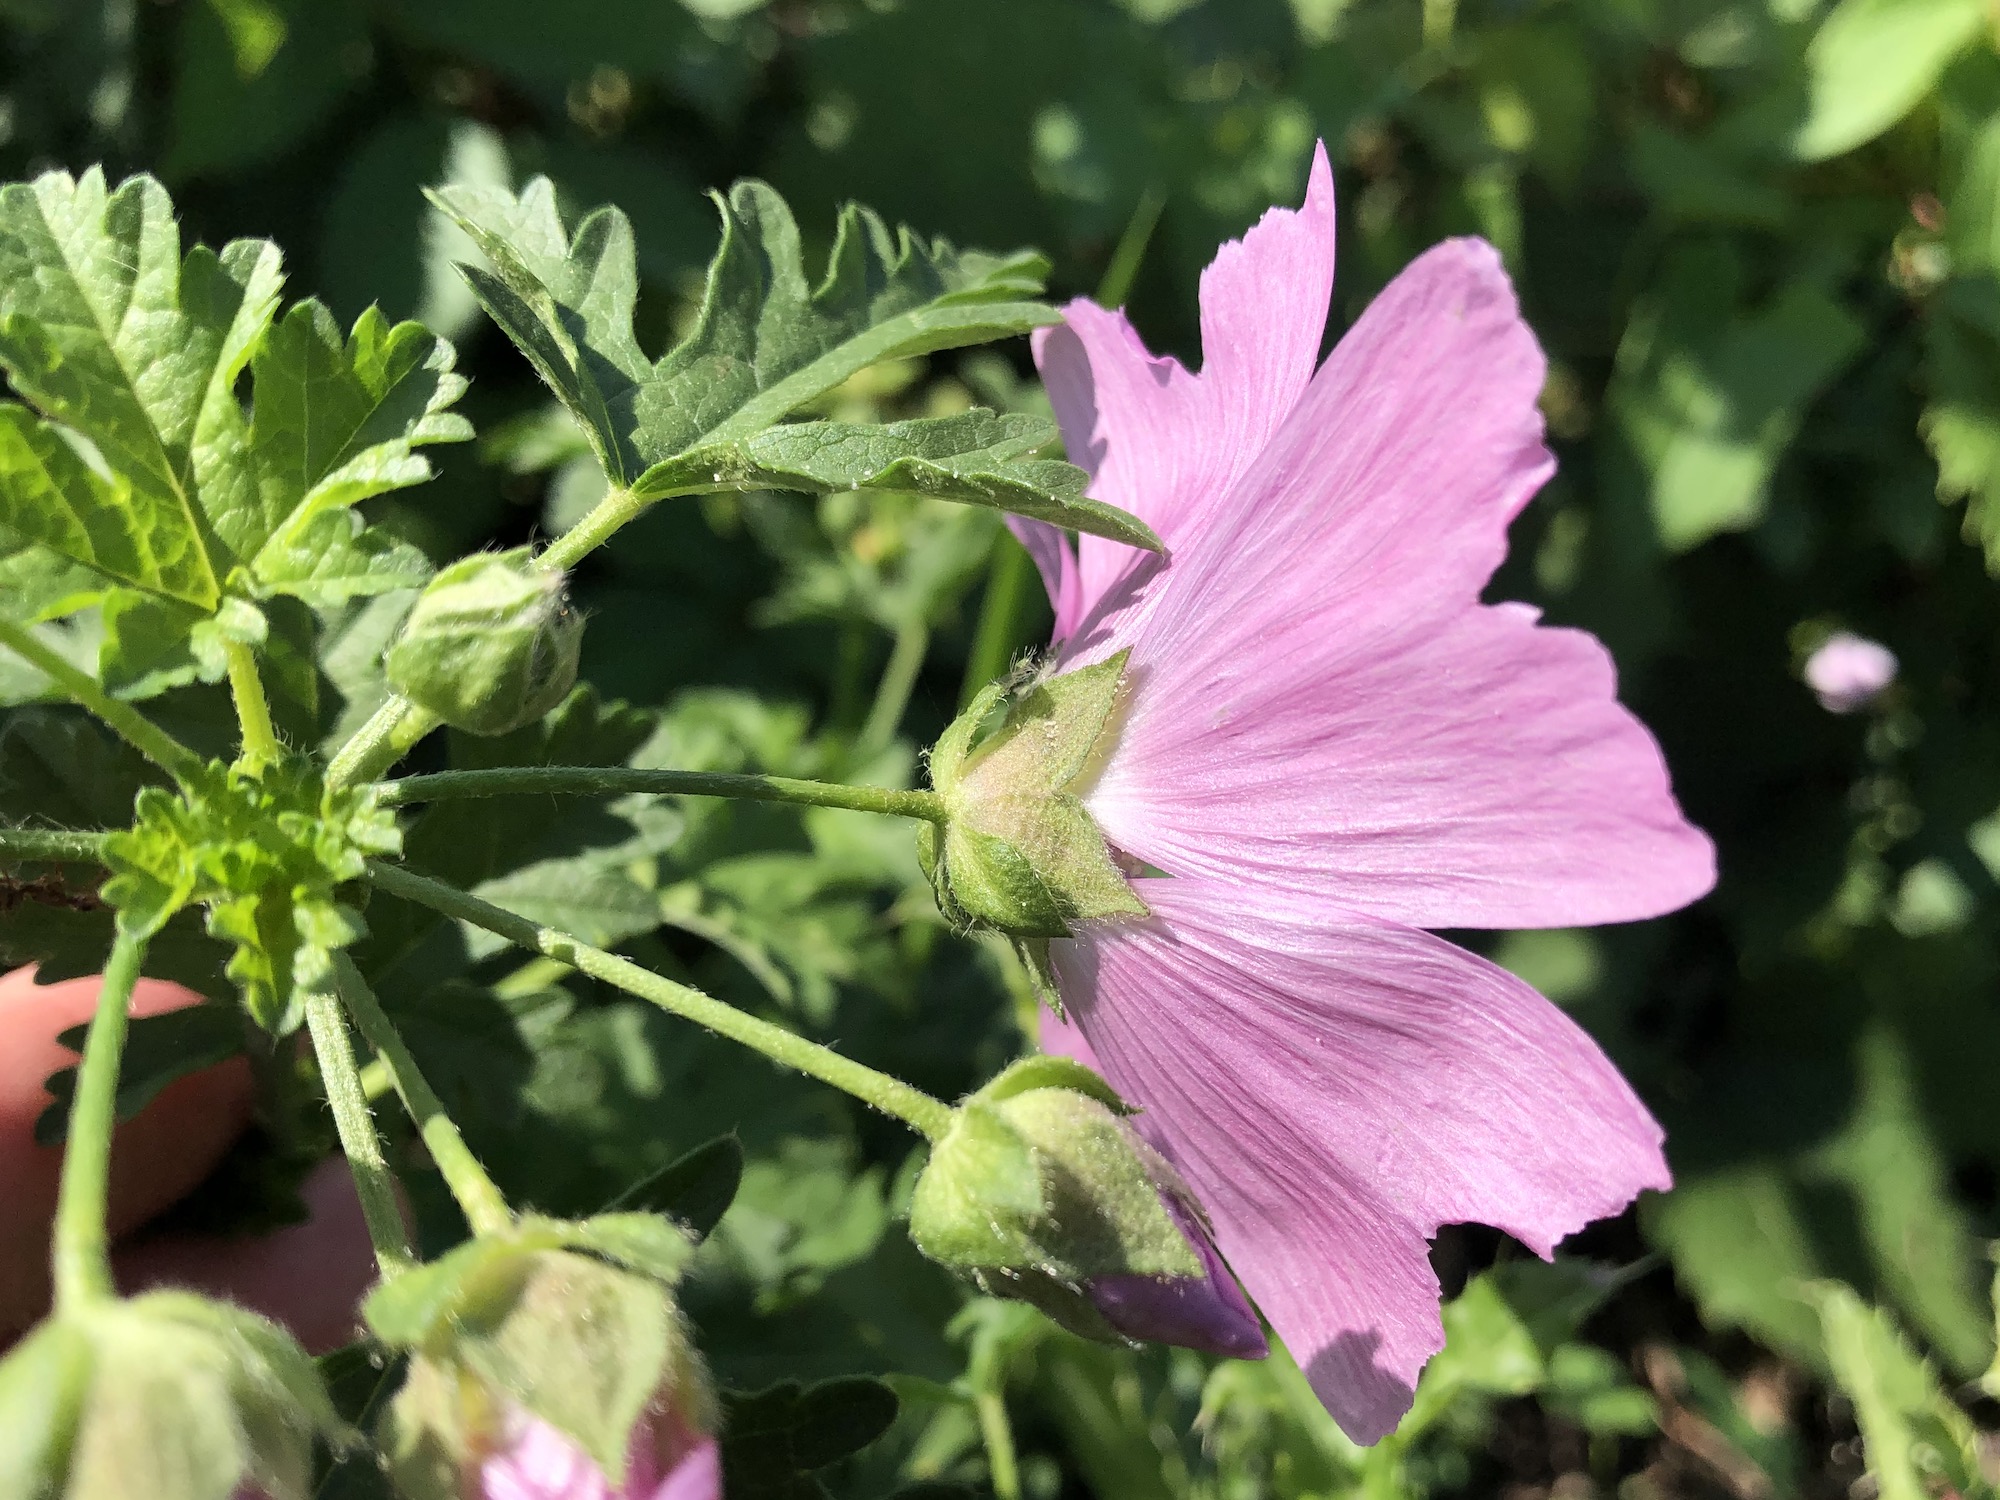 Vervain Mallow bracts on the shore of Lake Wingra in Vilas Park in Madison, Wisconsin on September 5, 2021.